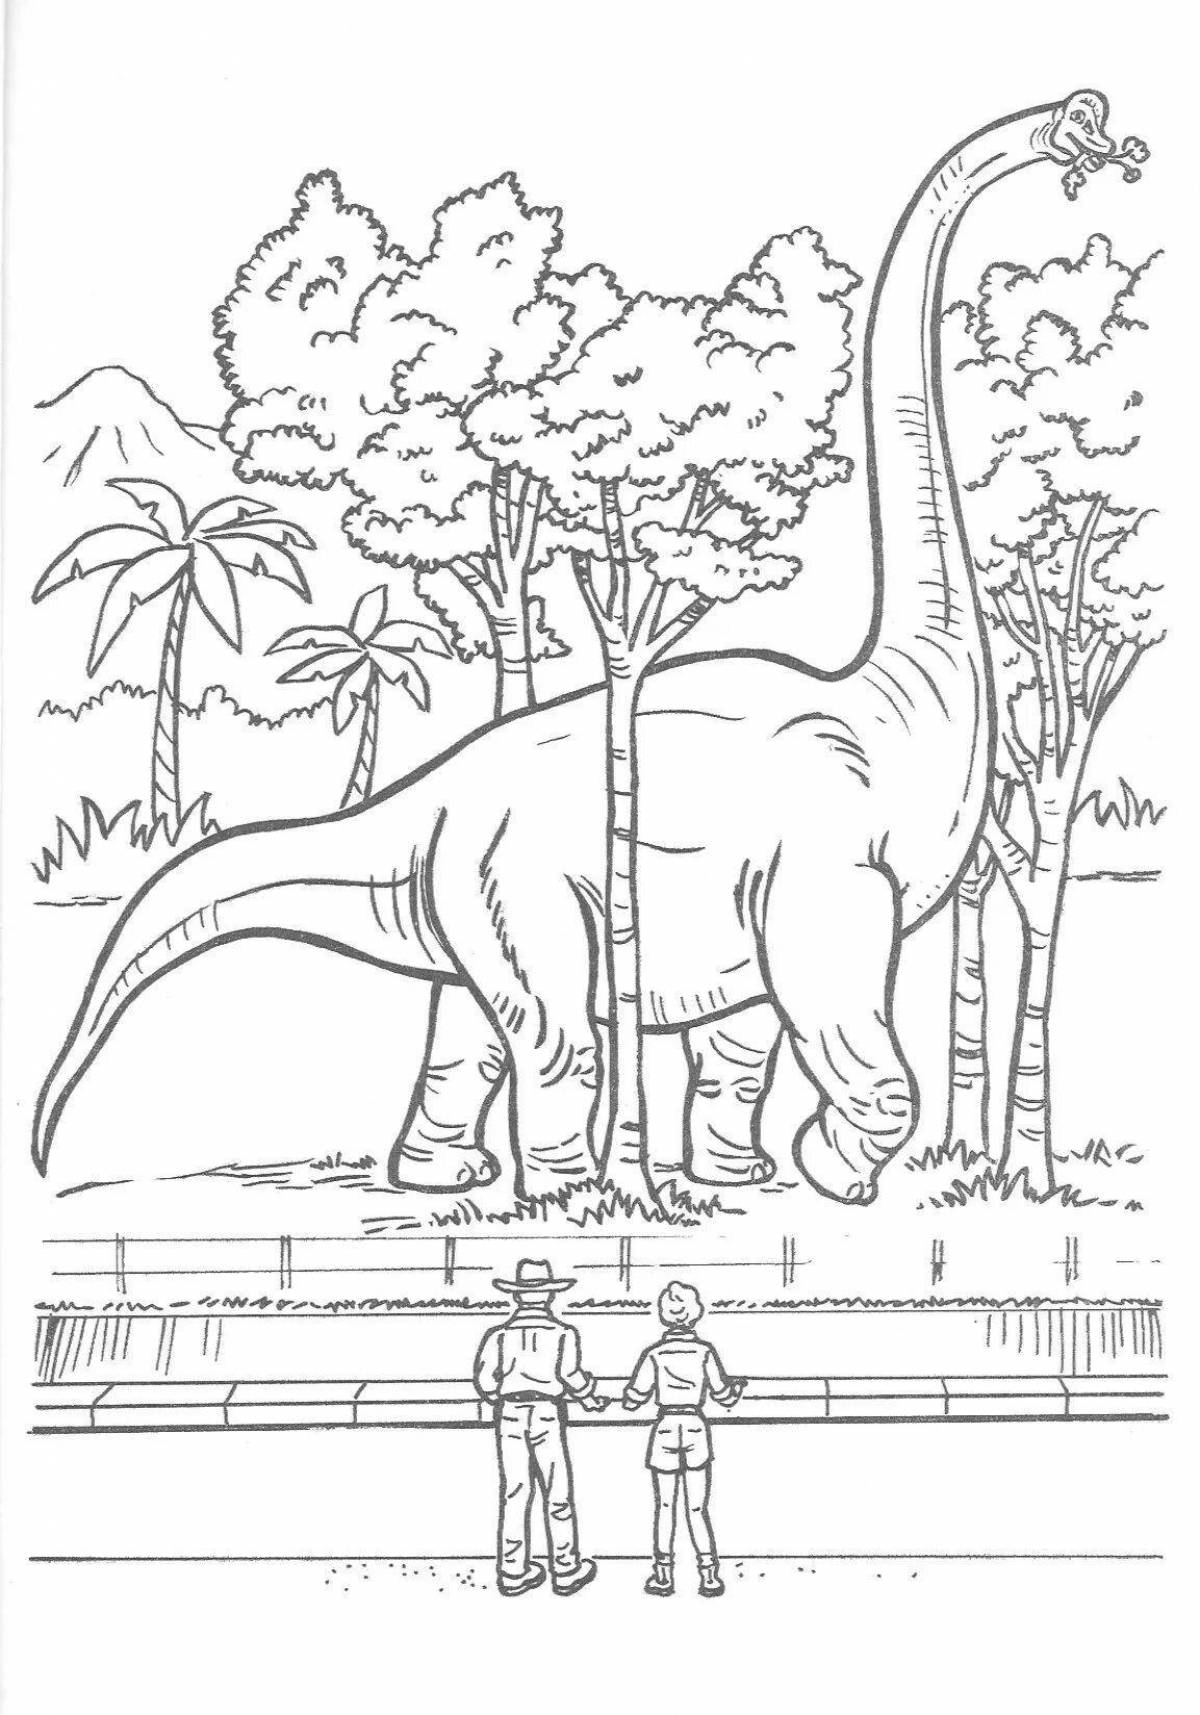 Luxury jurassic park coloring book